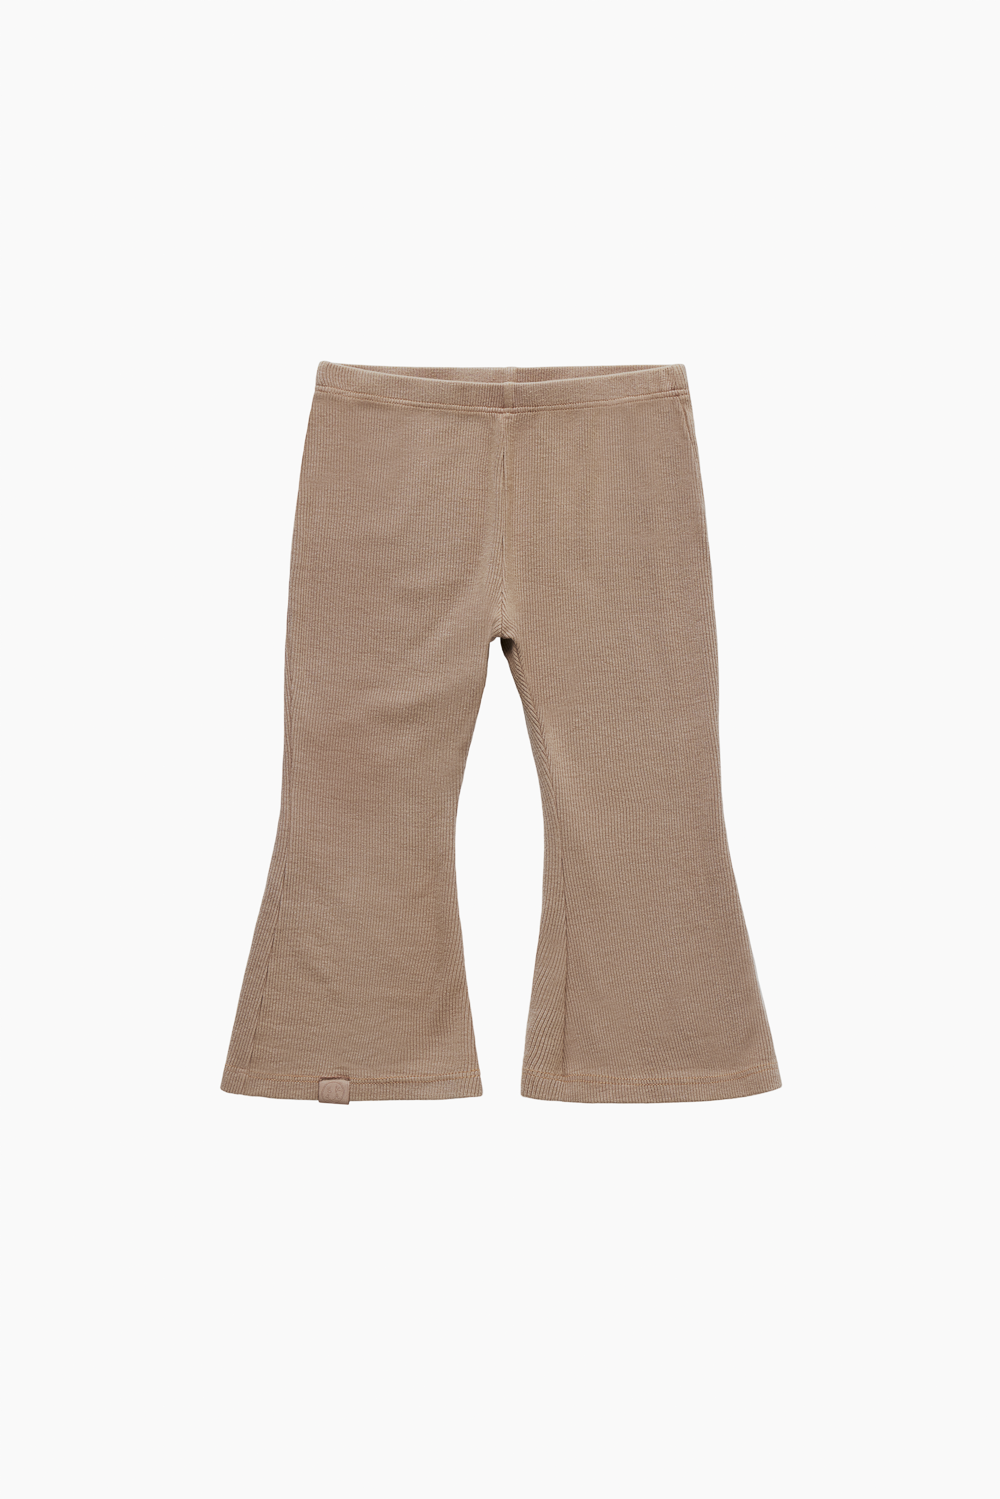 RIBBED MODAL KIDS FLARE PANTS - MAPLE Featured Image